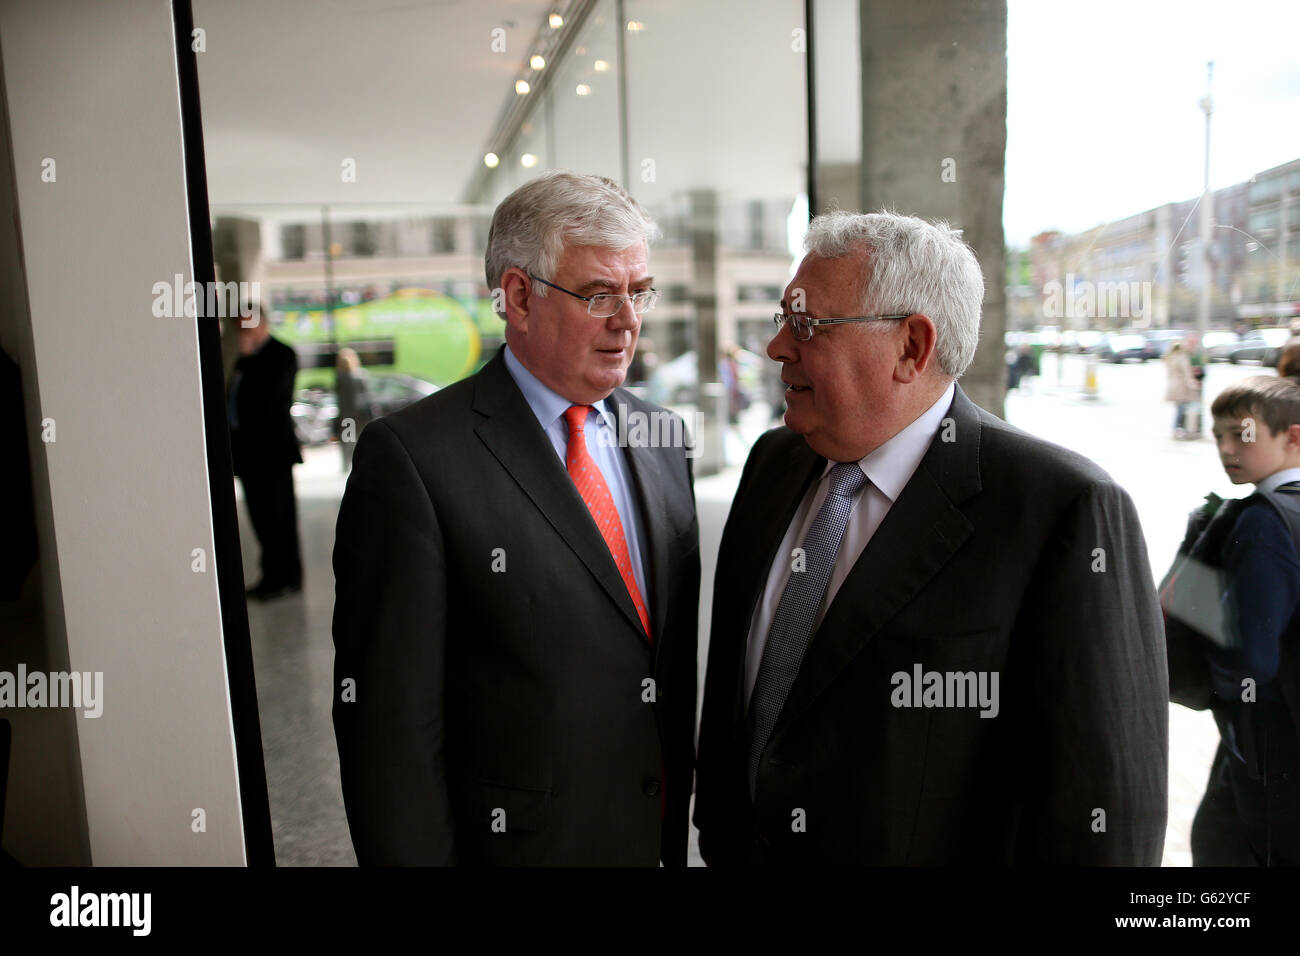 Tanaiste and Minister for Foreign Affairs and Trade Eamon Gilmore (left) with Junior Minister Joe Costello after launching One World, One Future: Ireland's Policy on International Development' at the Irish Aid centre, Dublin. Stock Photo